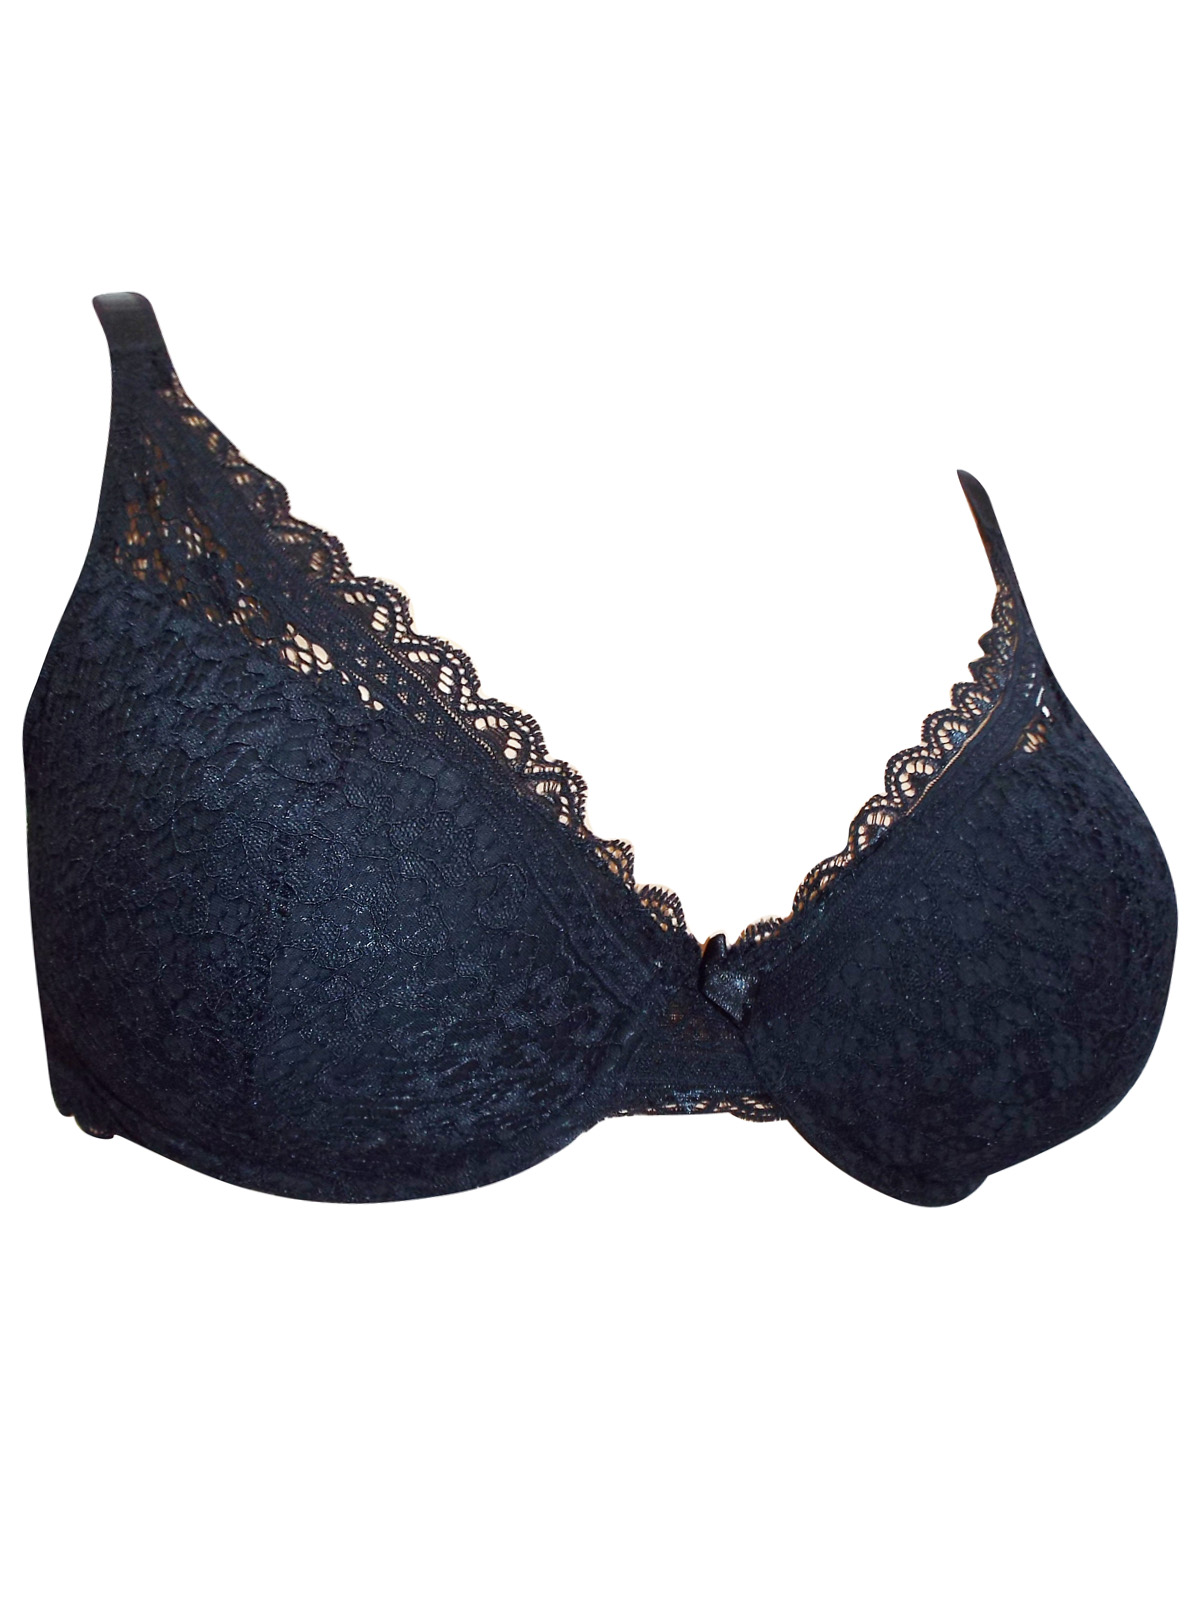 Trofe - - Trofé BLACK Floral Lace Padded Full Cup Bra - Size 34 to 40